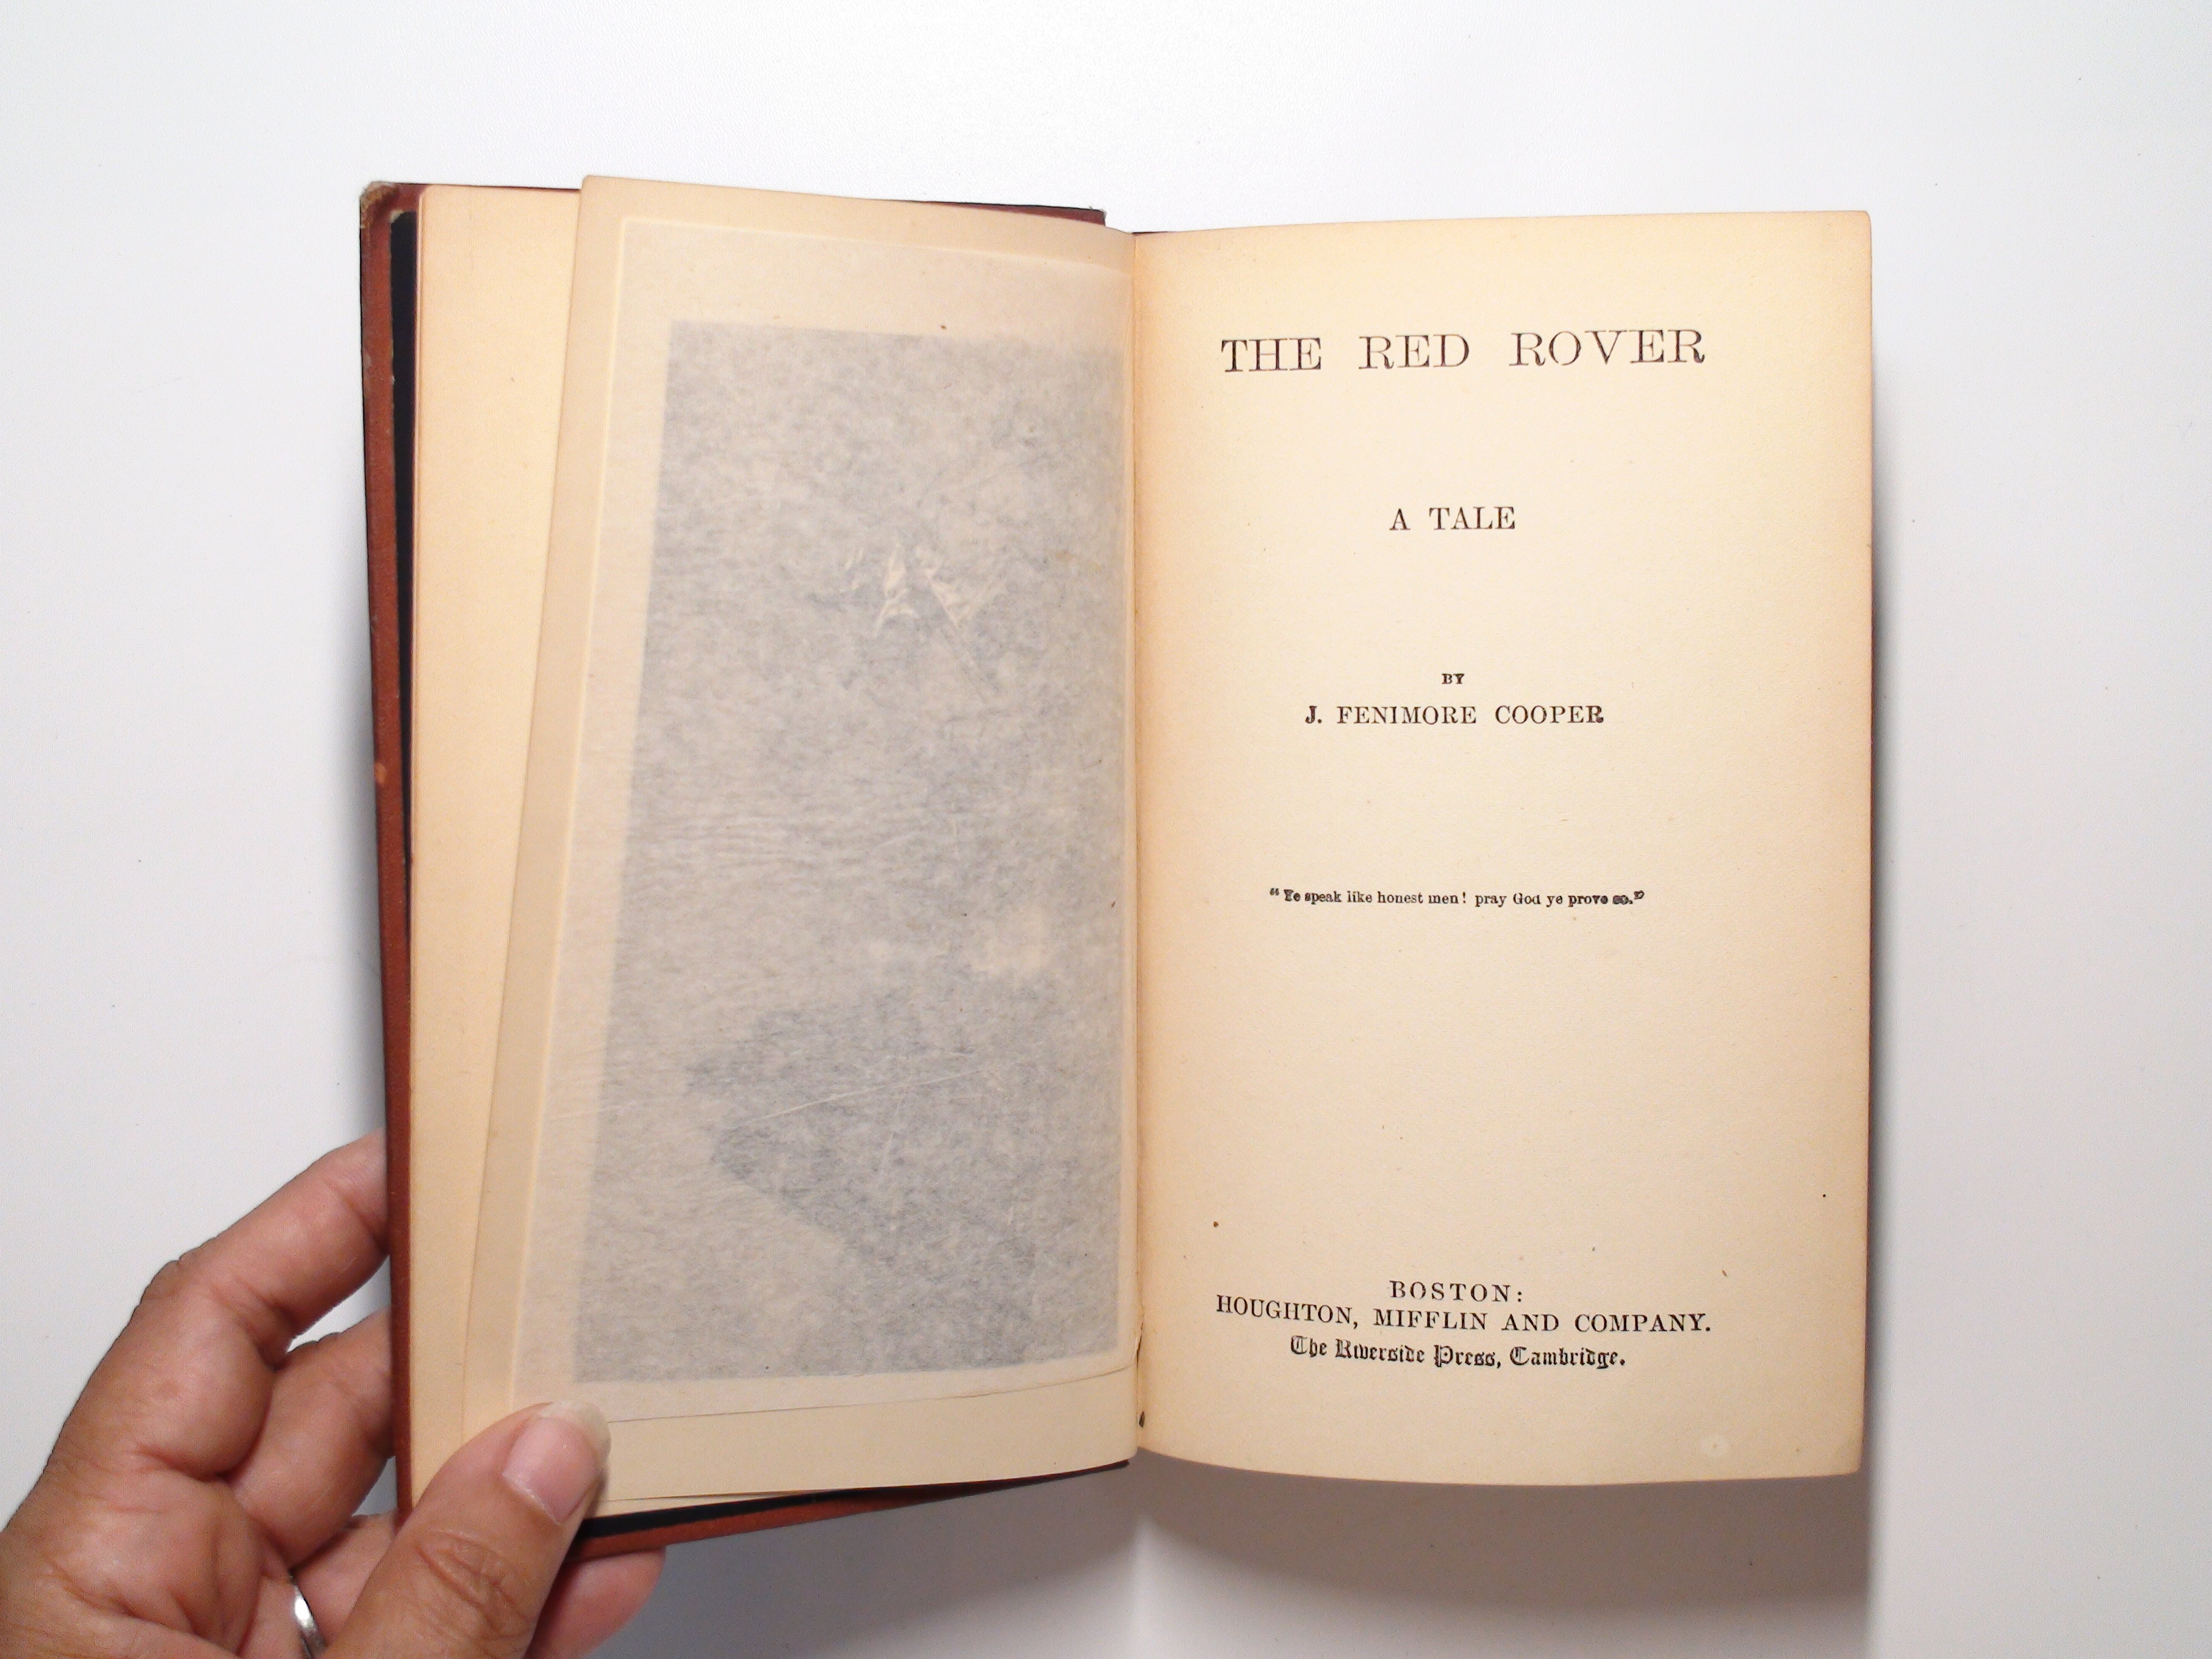 The Red Rover, A Tale, by J. Fenimore Cooper, Naval Interest Novel, c1890s